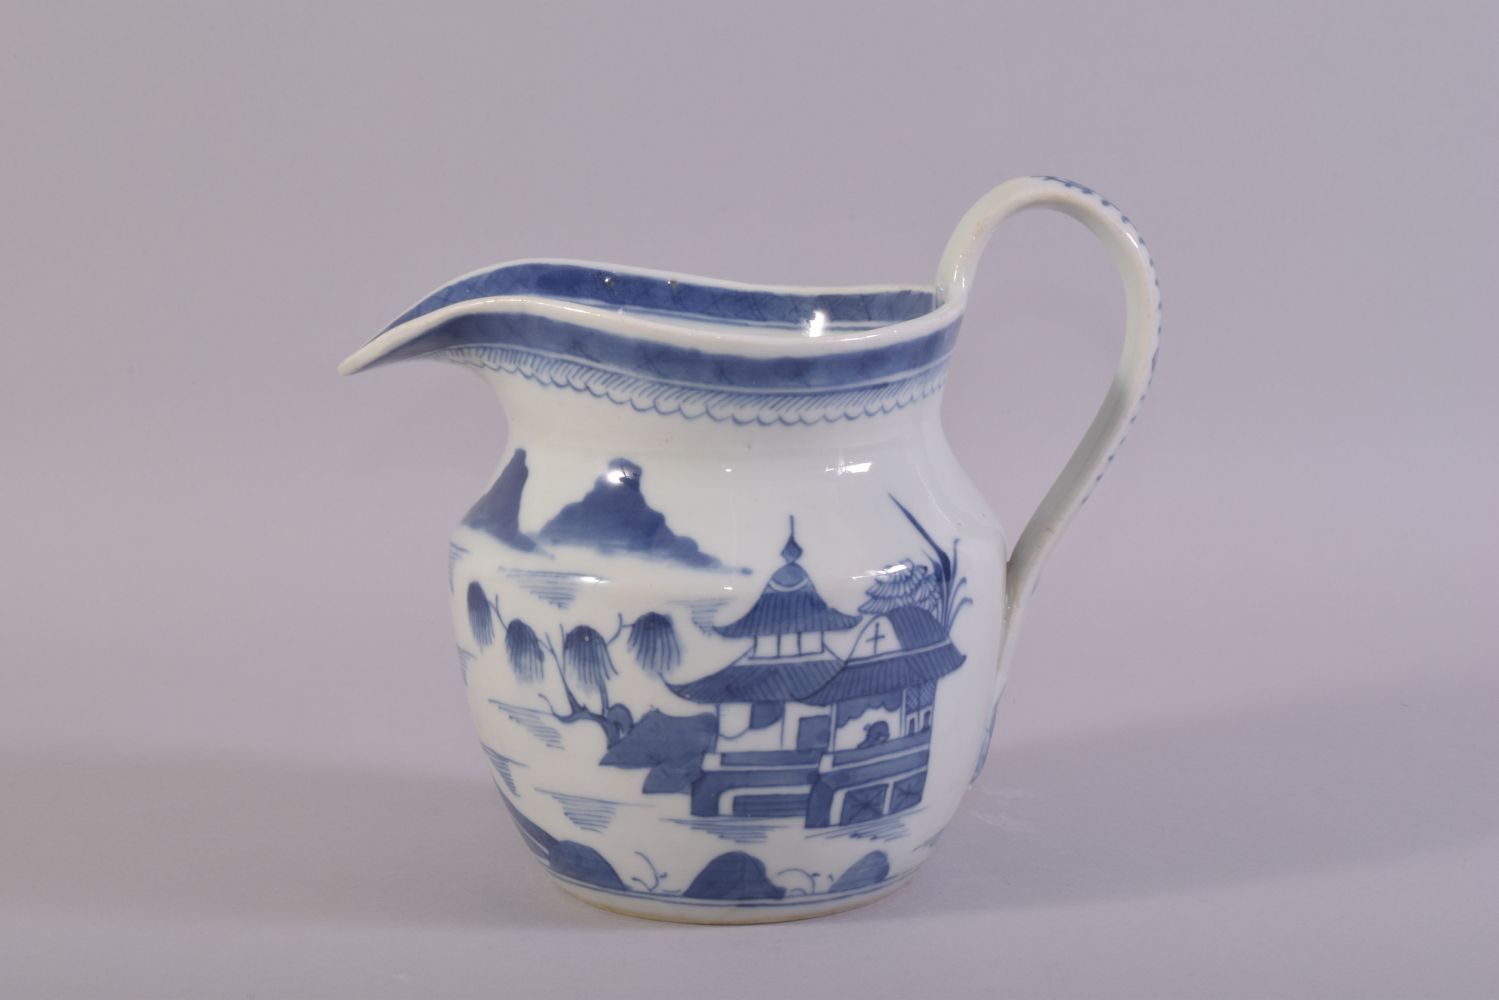 A CHINESE BLUE AND WHITE PORCELAIN JUG, decorated with a landscape scene depicting buildings, - Image 3 of 6